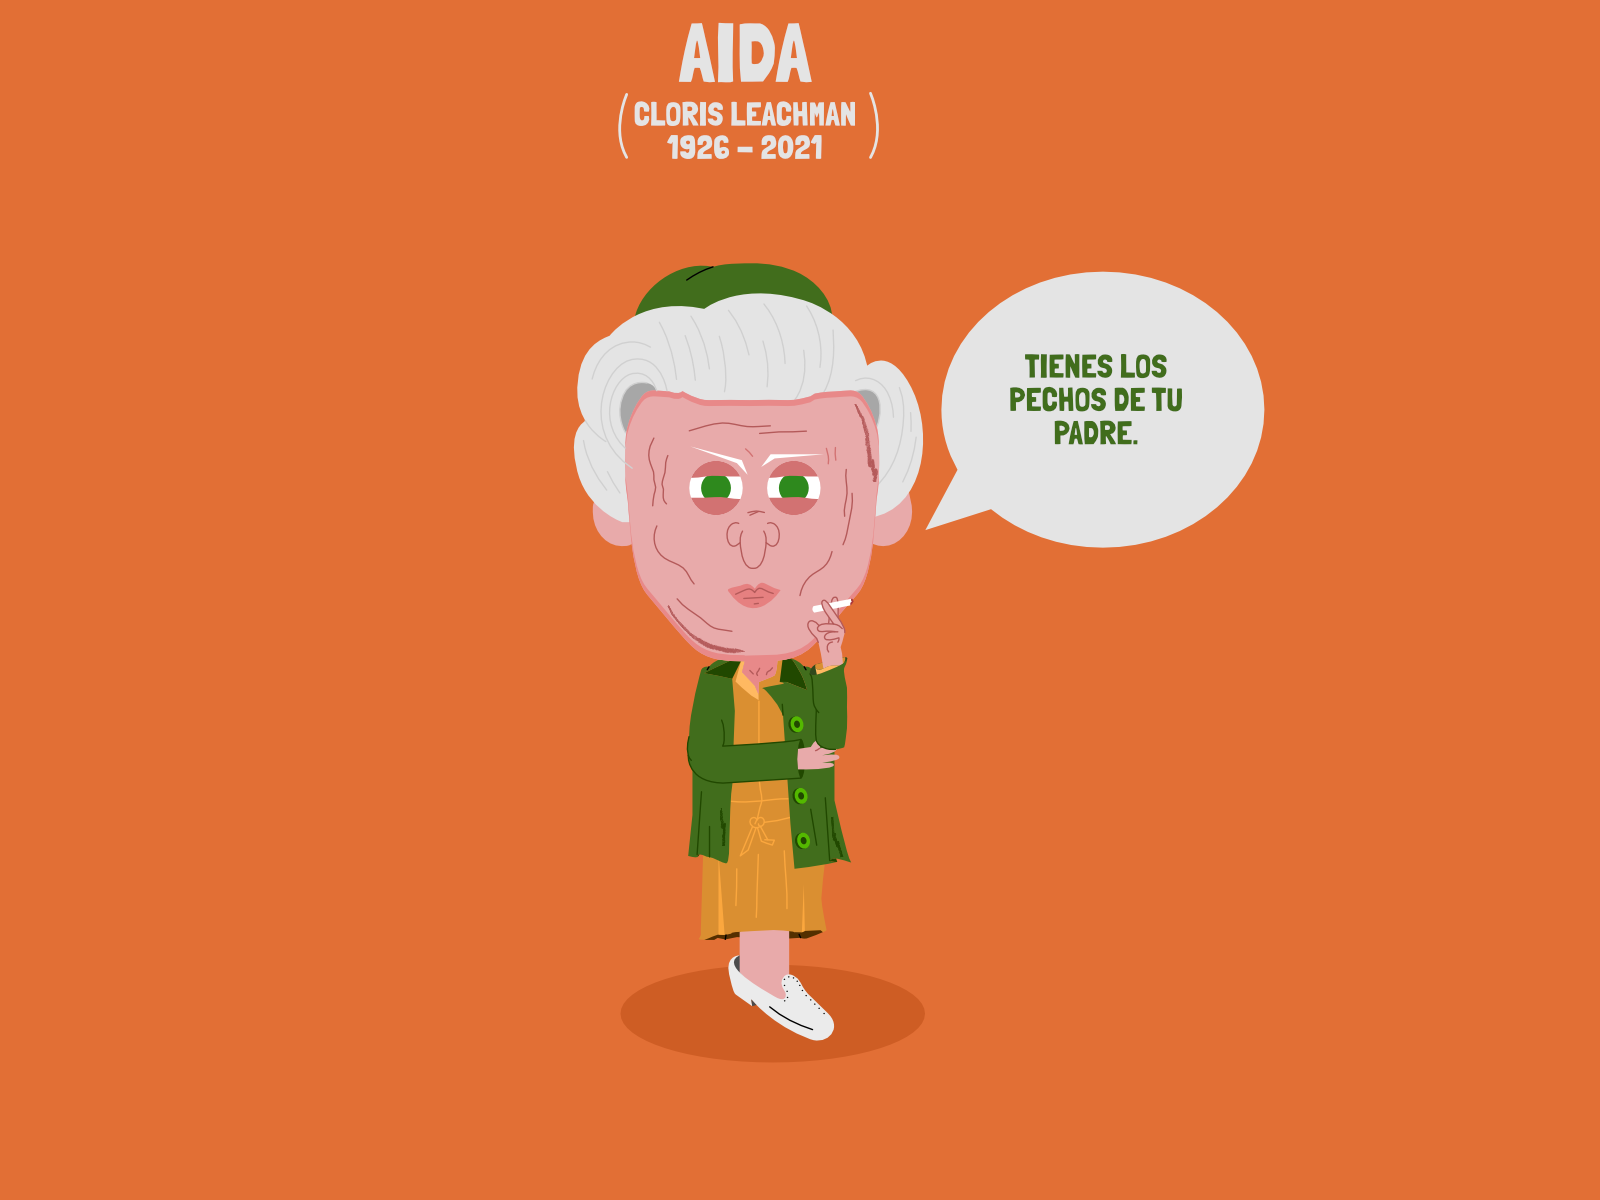 Aida (Malcolm in the Middle) by Giovanni García on Dribbble